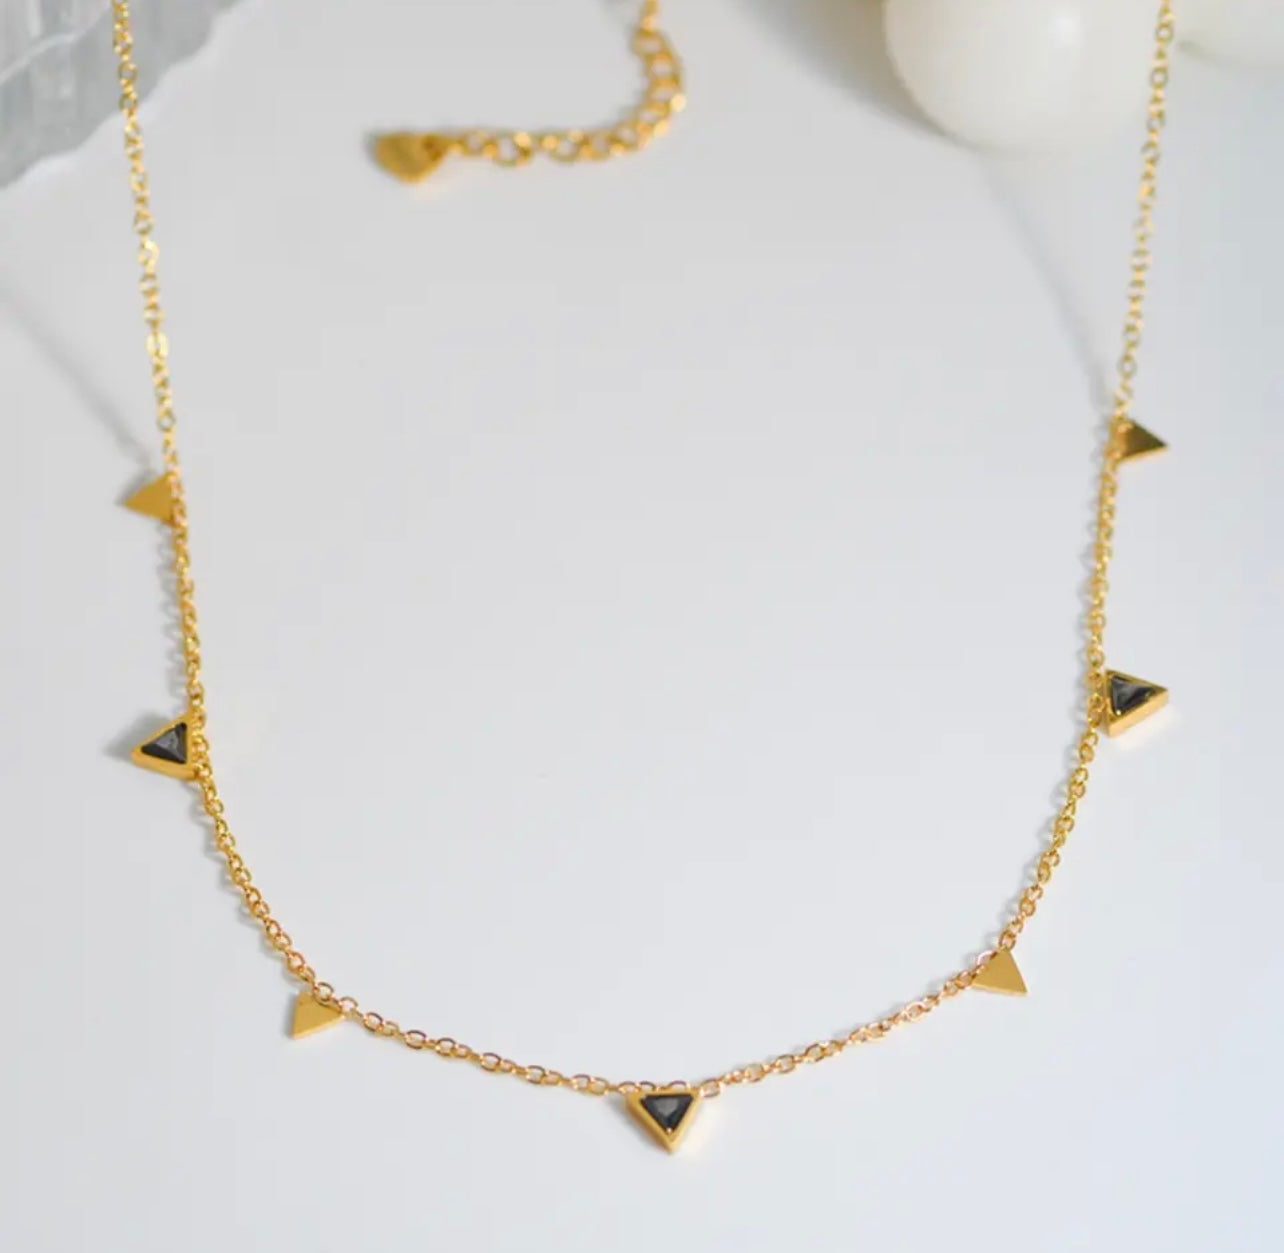 Choker Necklace with Triangle Black Crystals - Gold